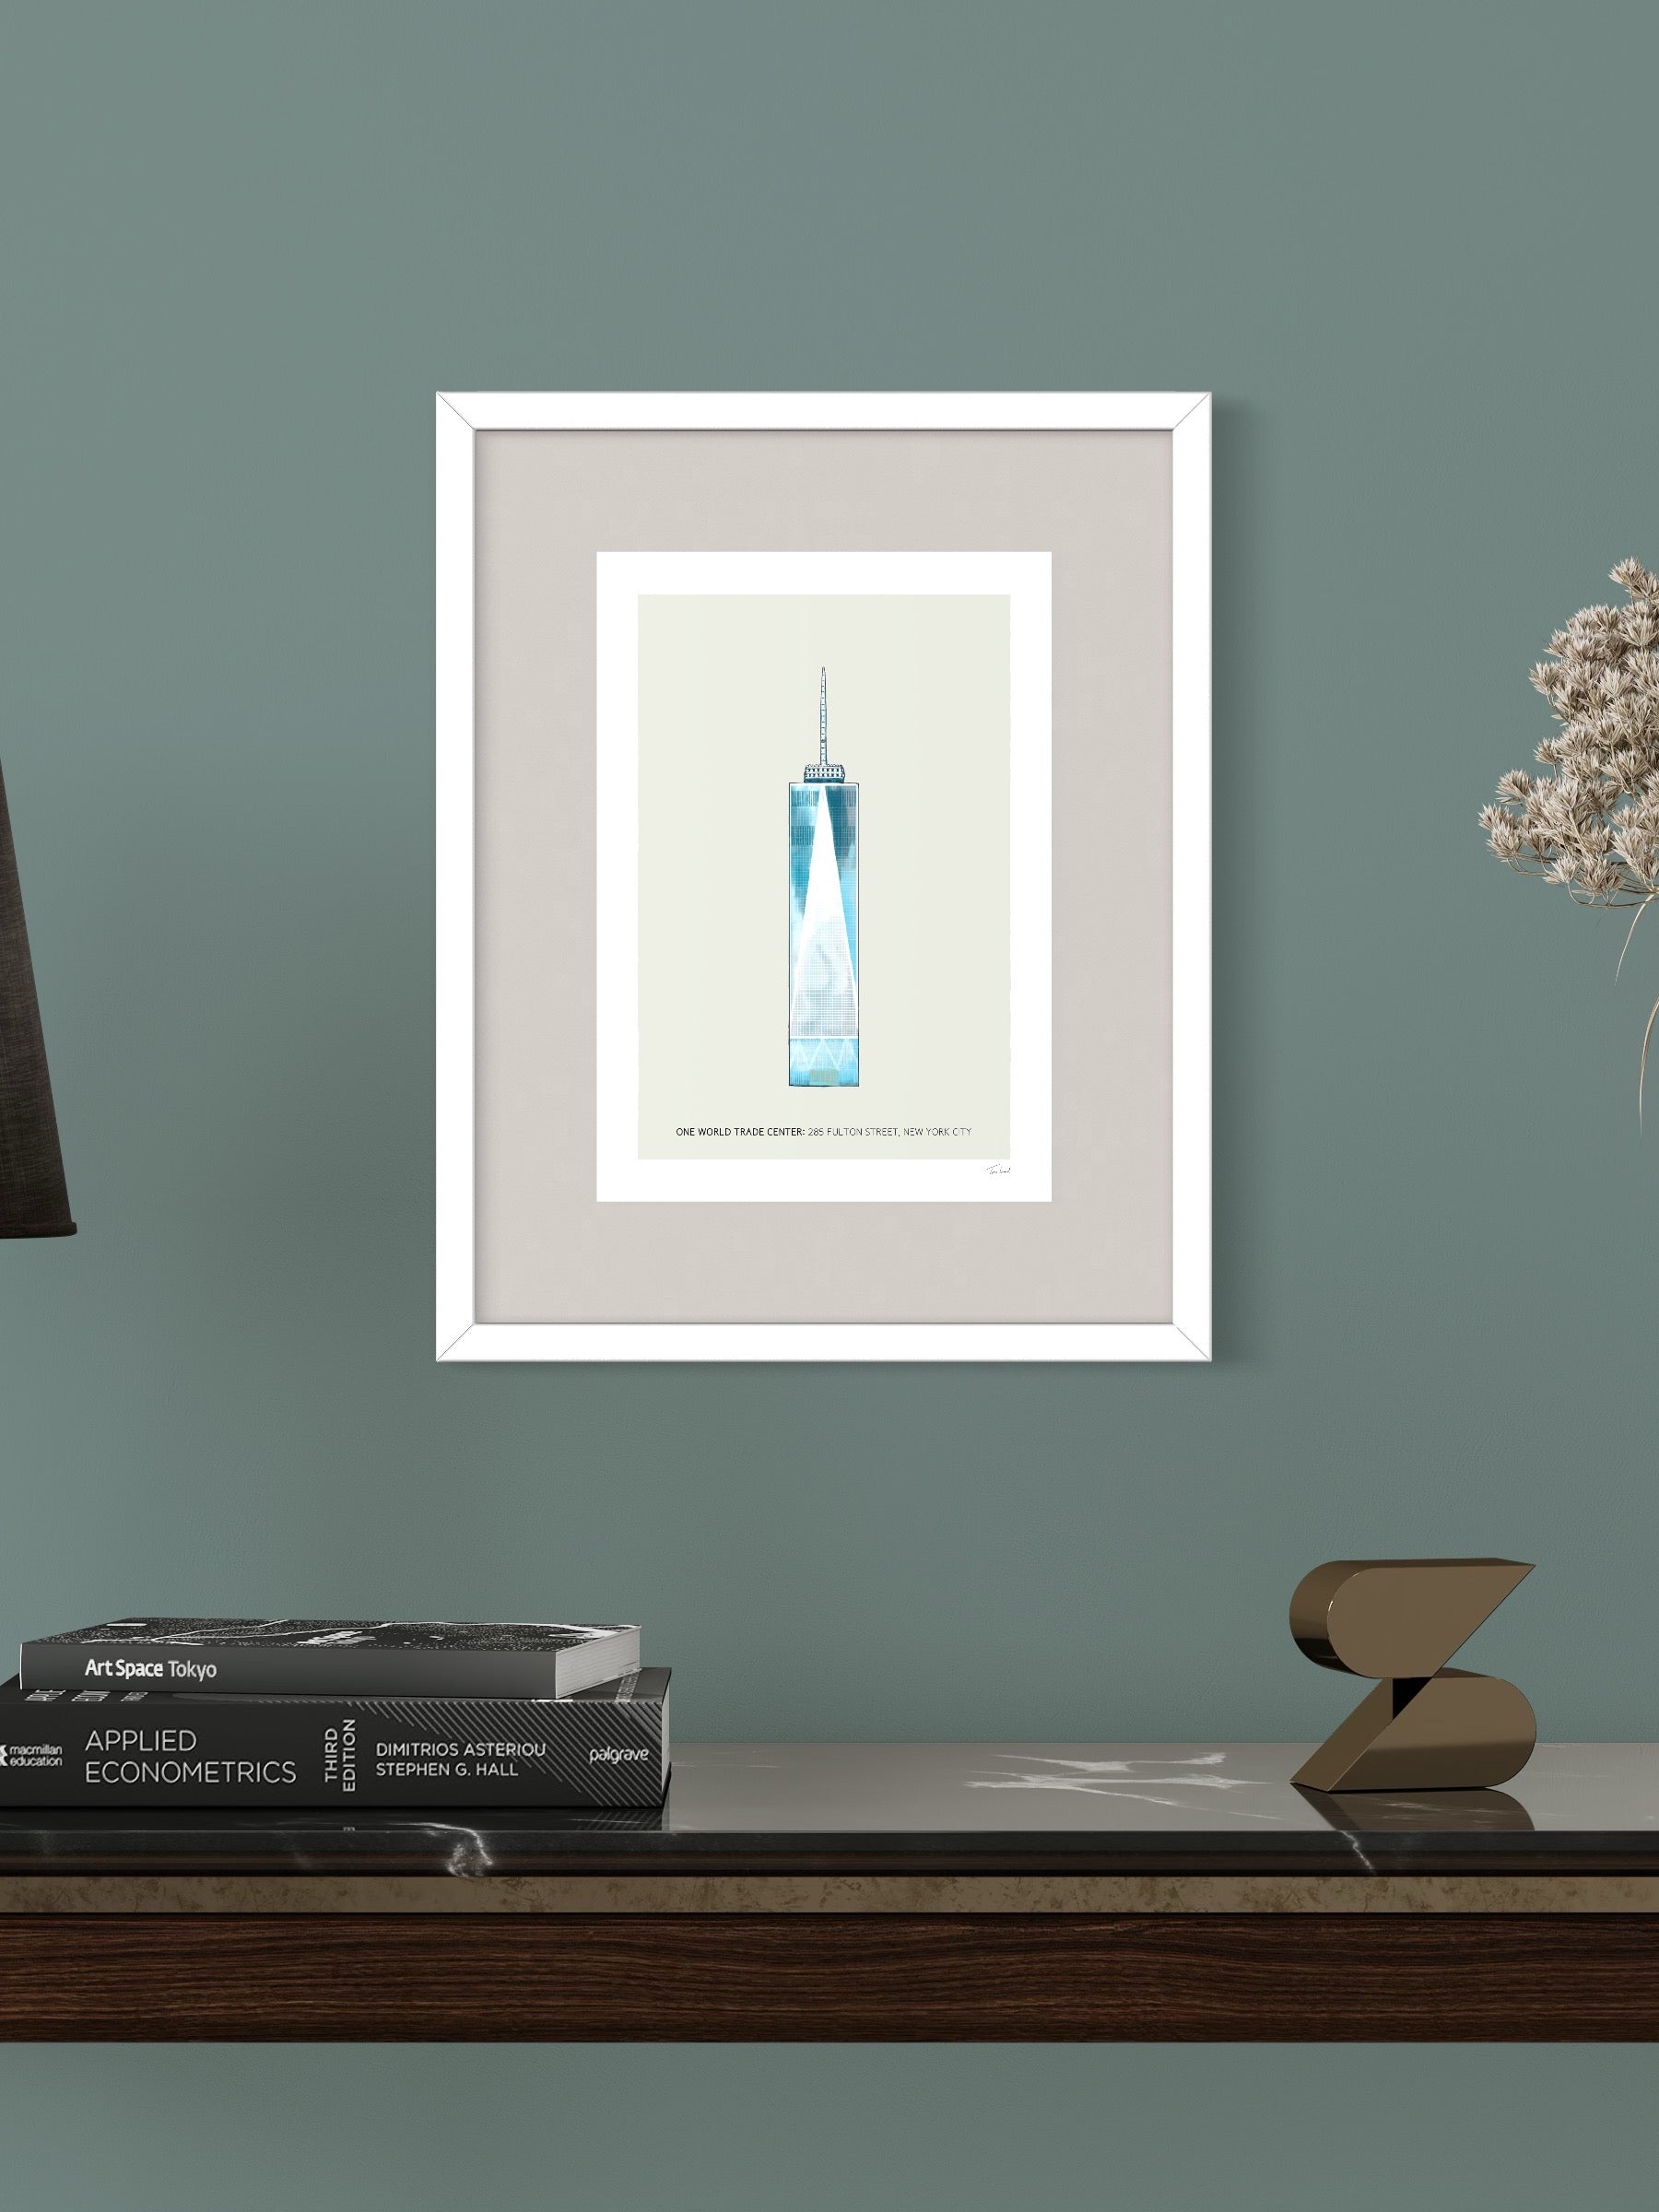 This image shows a giclee wall art print by Tom Laird Illustration of the world-famous New York City landmark the One World Trade Center, framed in a beautiful living room with tasteful modern home decor. This art print is available from Tom Laird Illustration in A4 size.